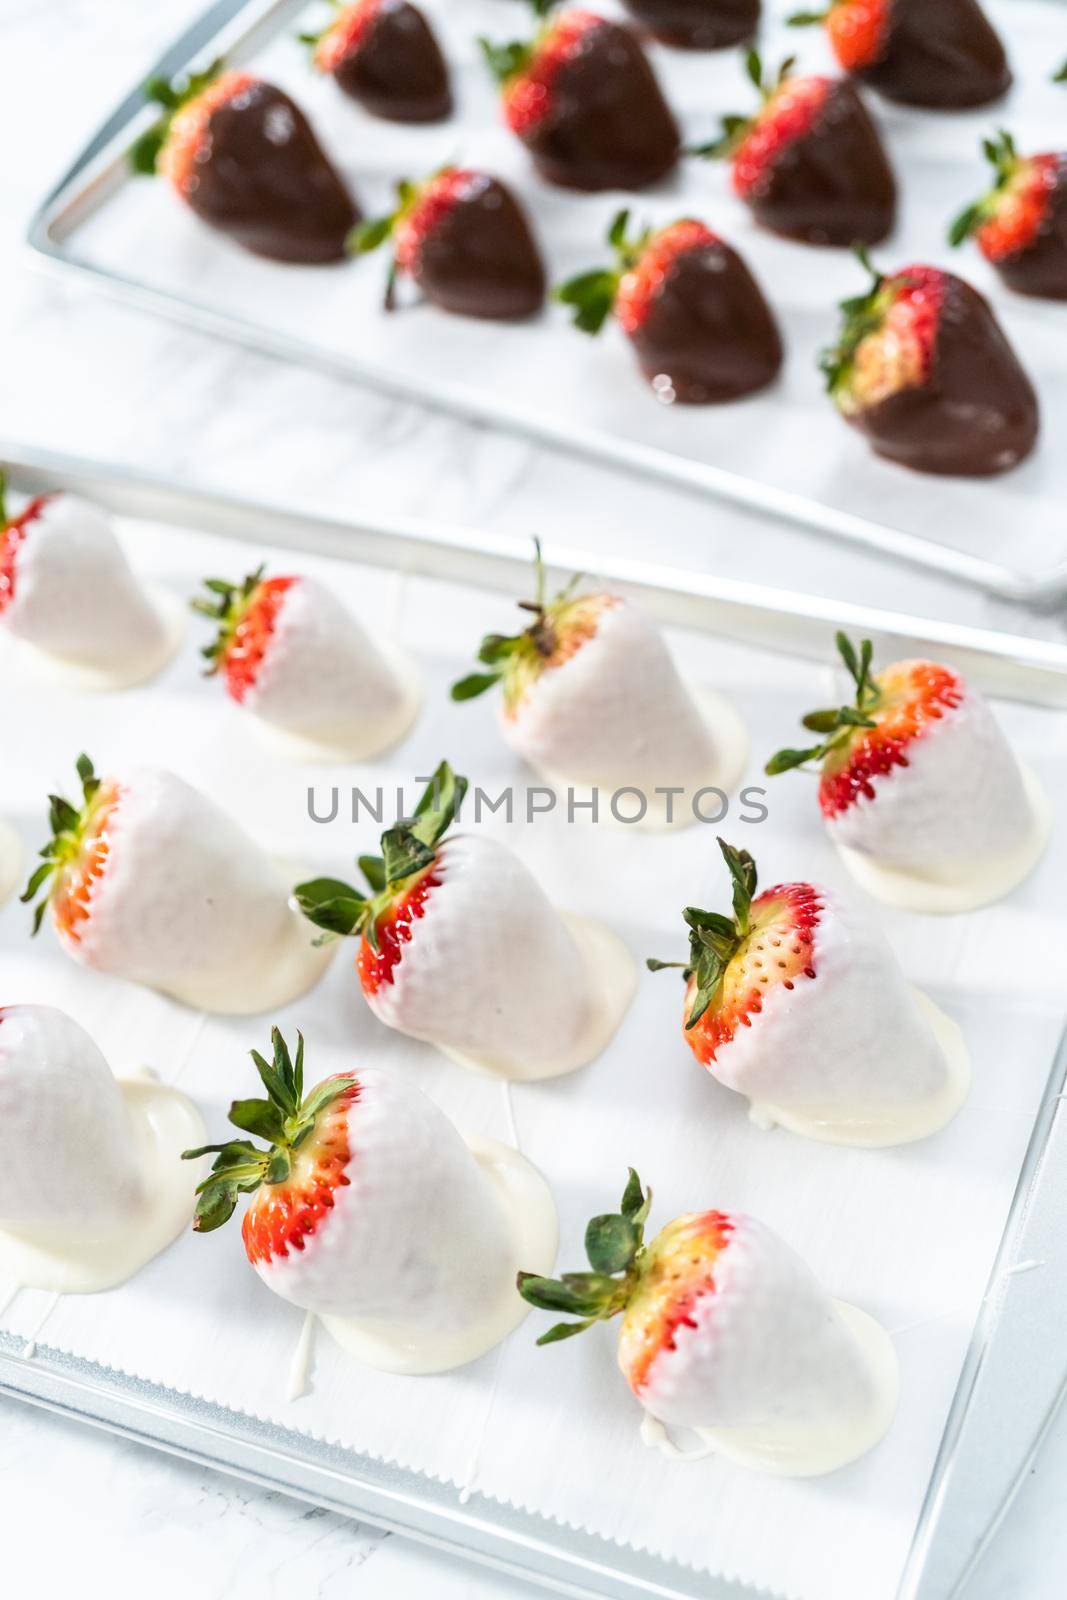 Chocolate dipped strawberries by arinahabich